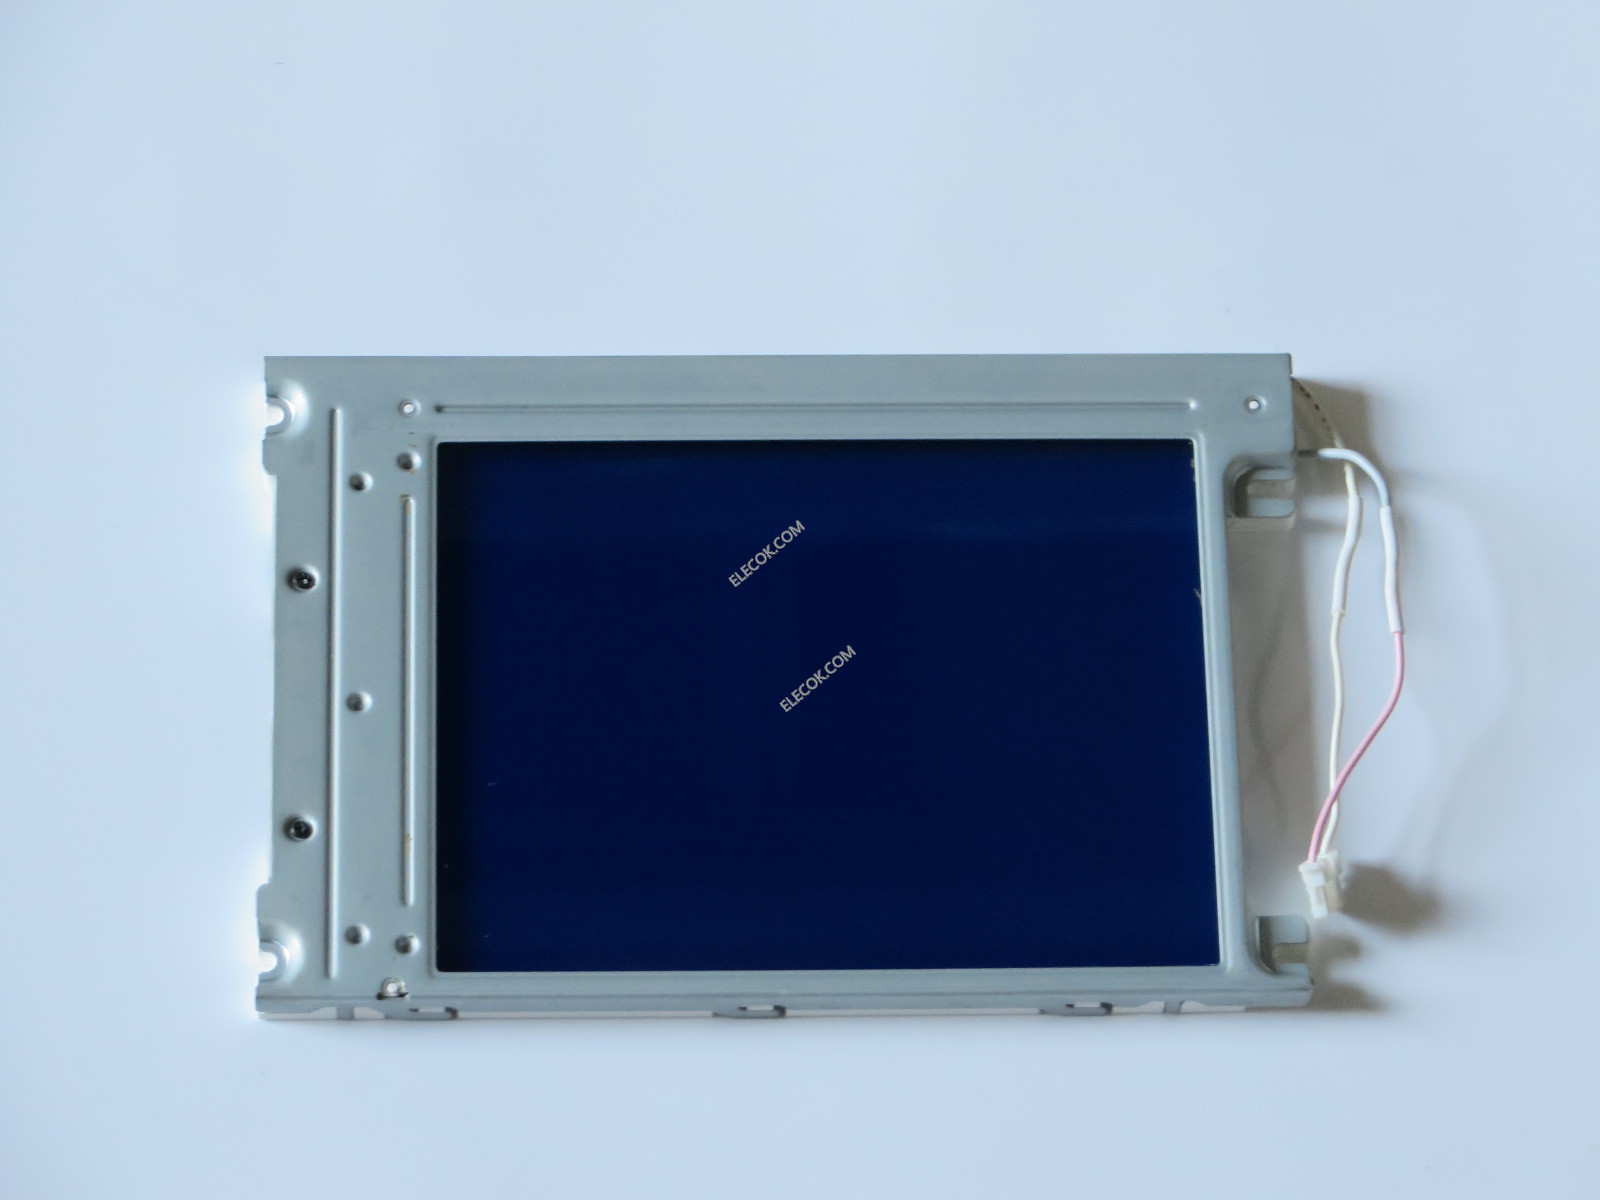 Applicable for profilis gp37w2-bg41-24v human-Machine Interface touch screen